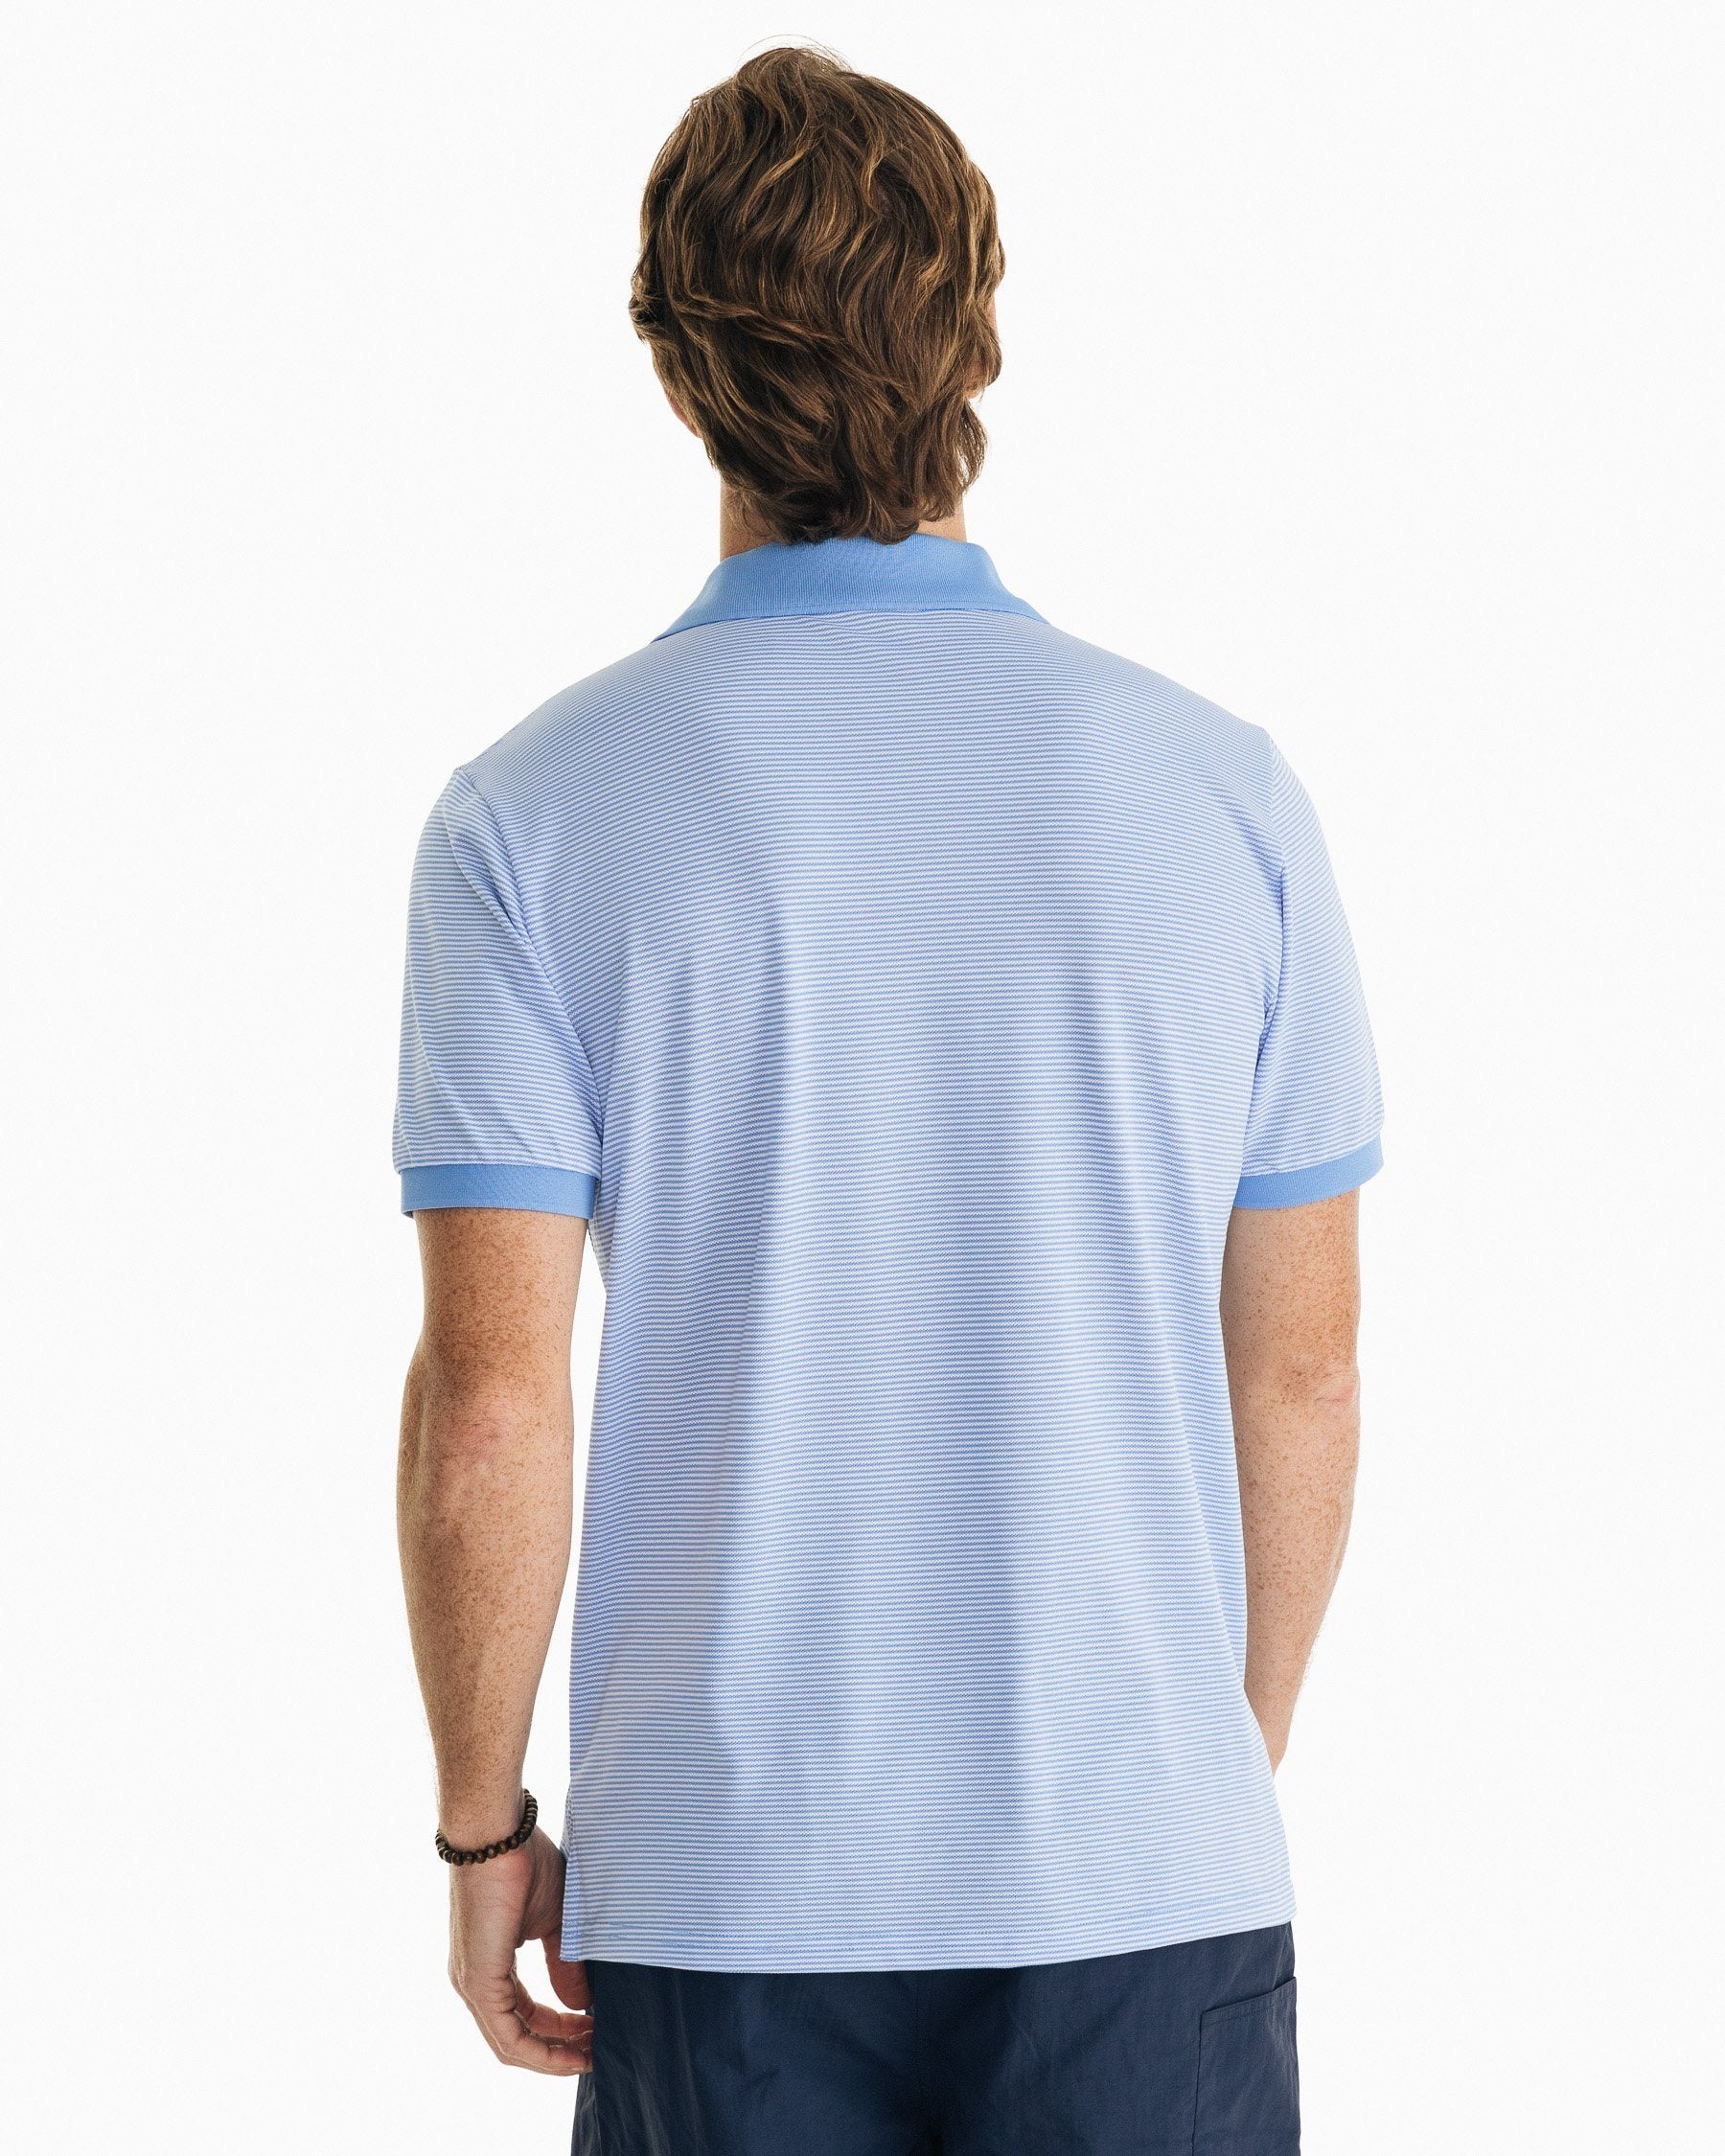 Mens Striped Performance Polo Shirt | Southern Tide